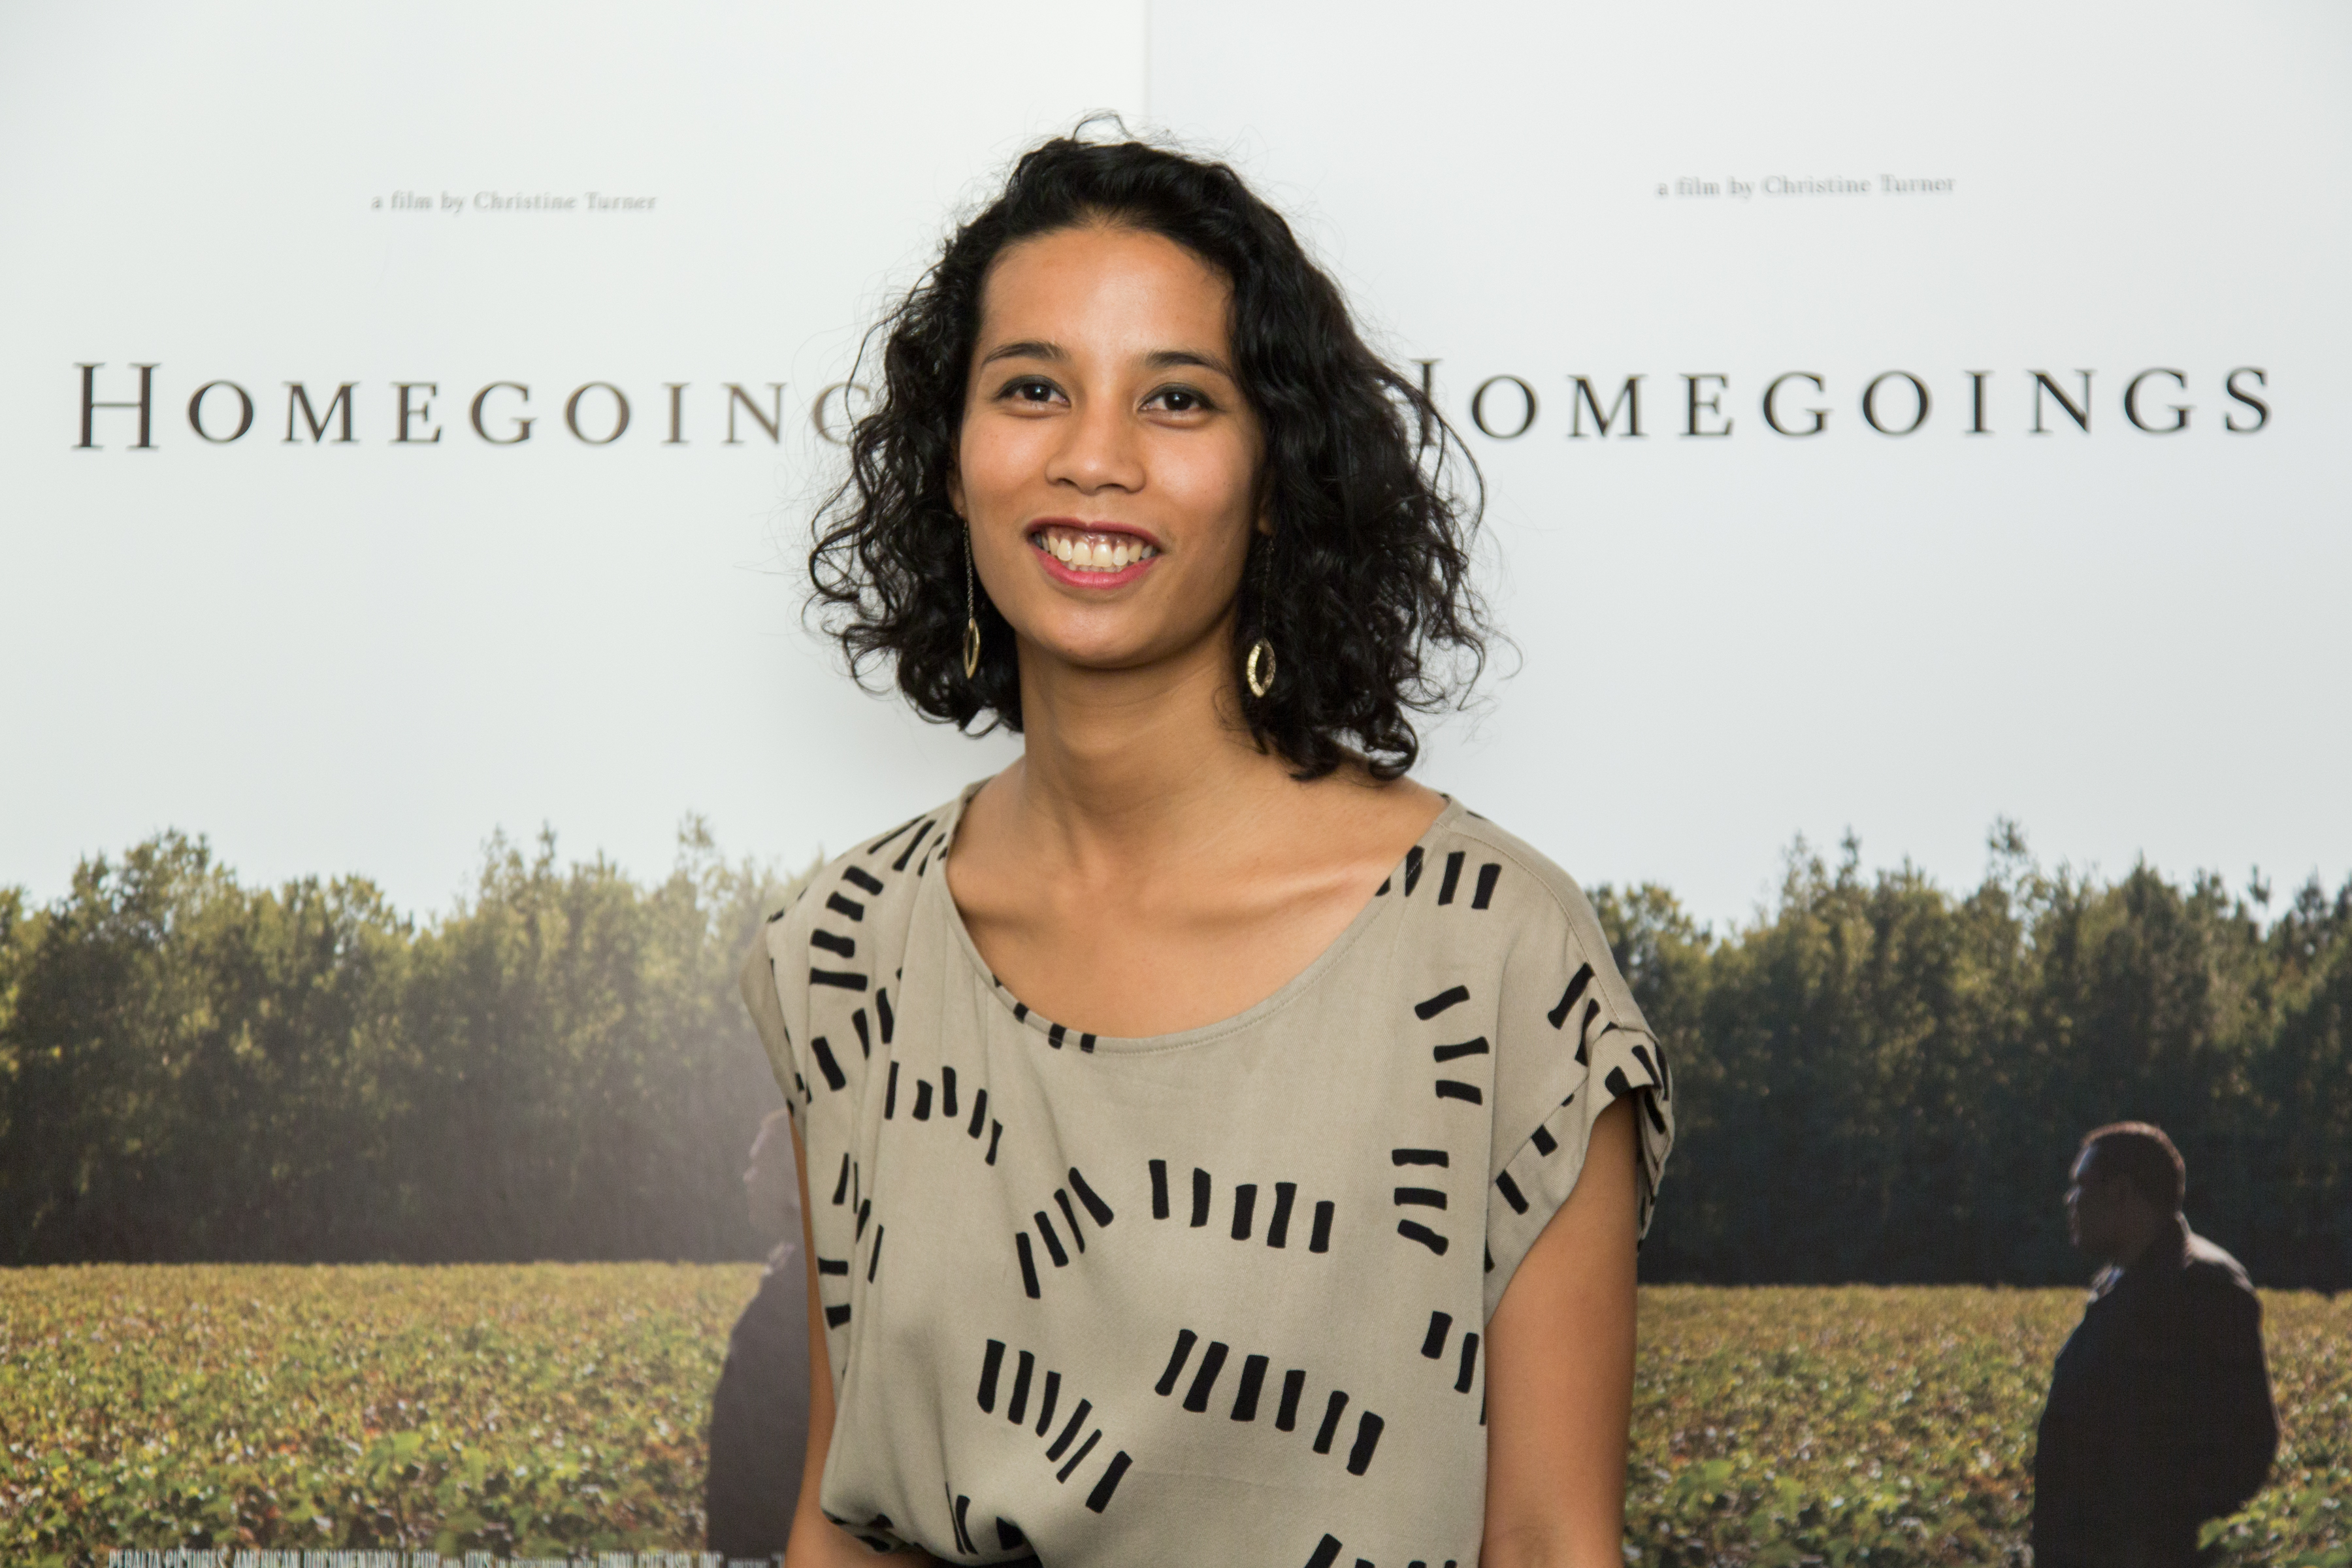 Christine Turner at Homegoings premiere at Museum of Modern Art, New York City